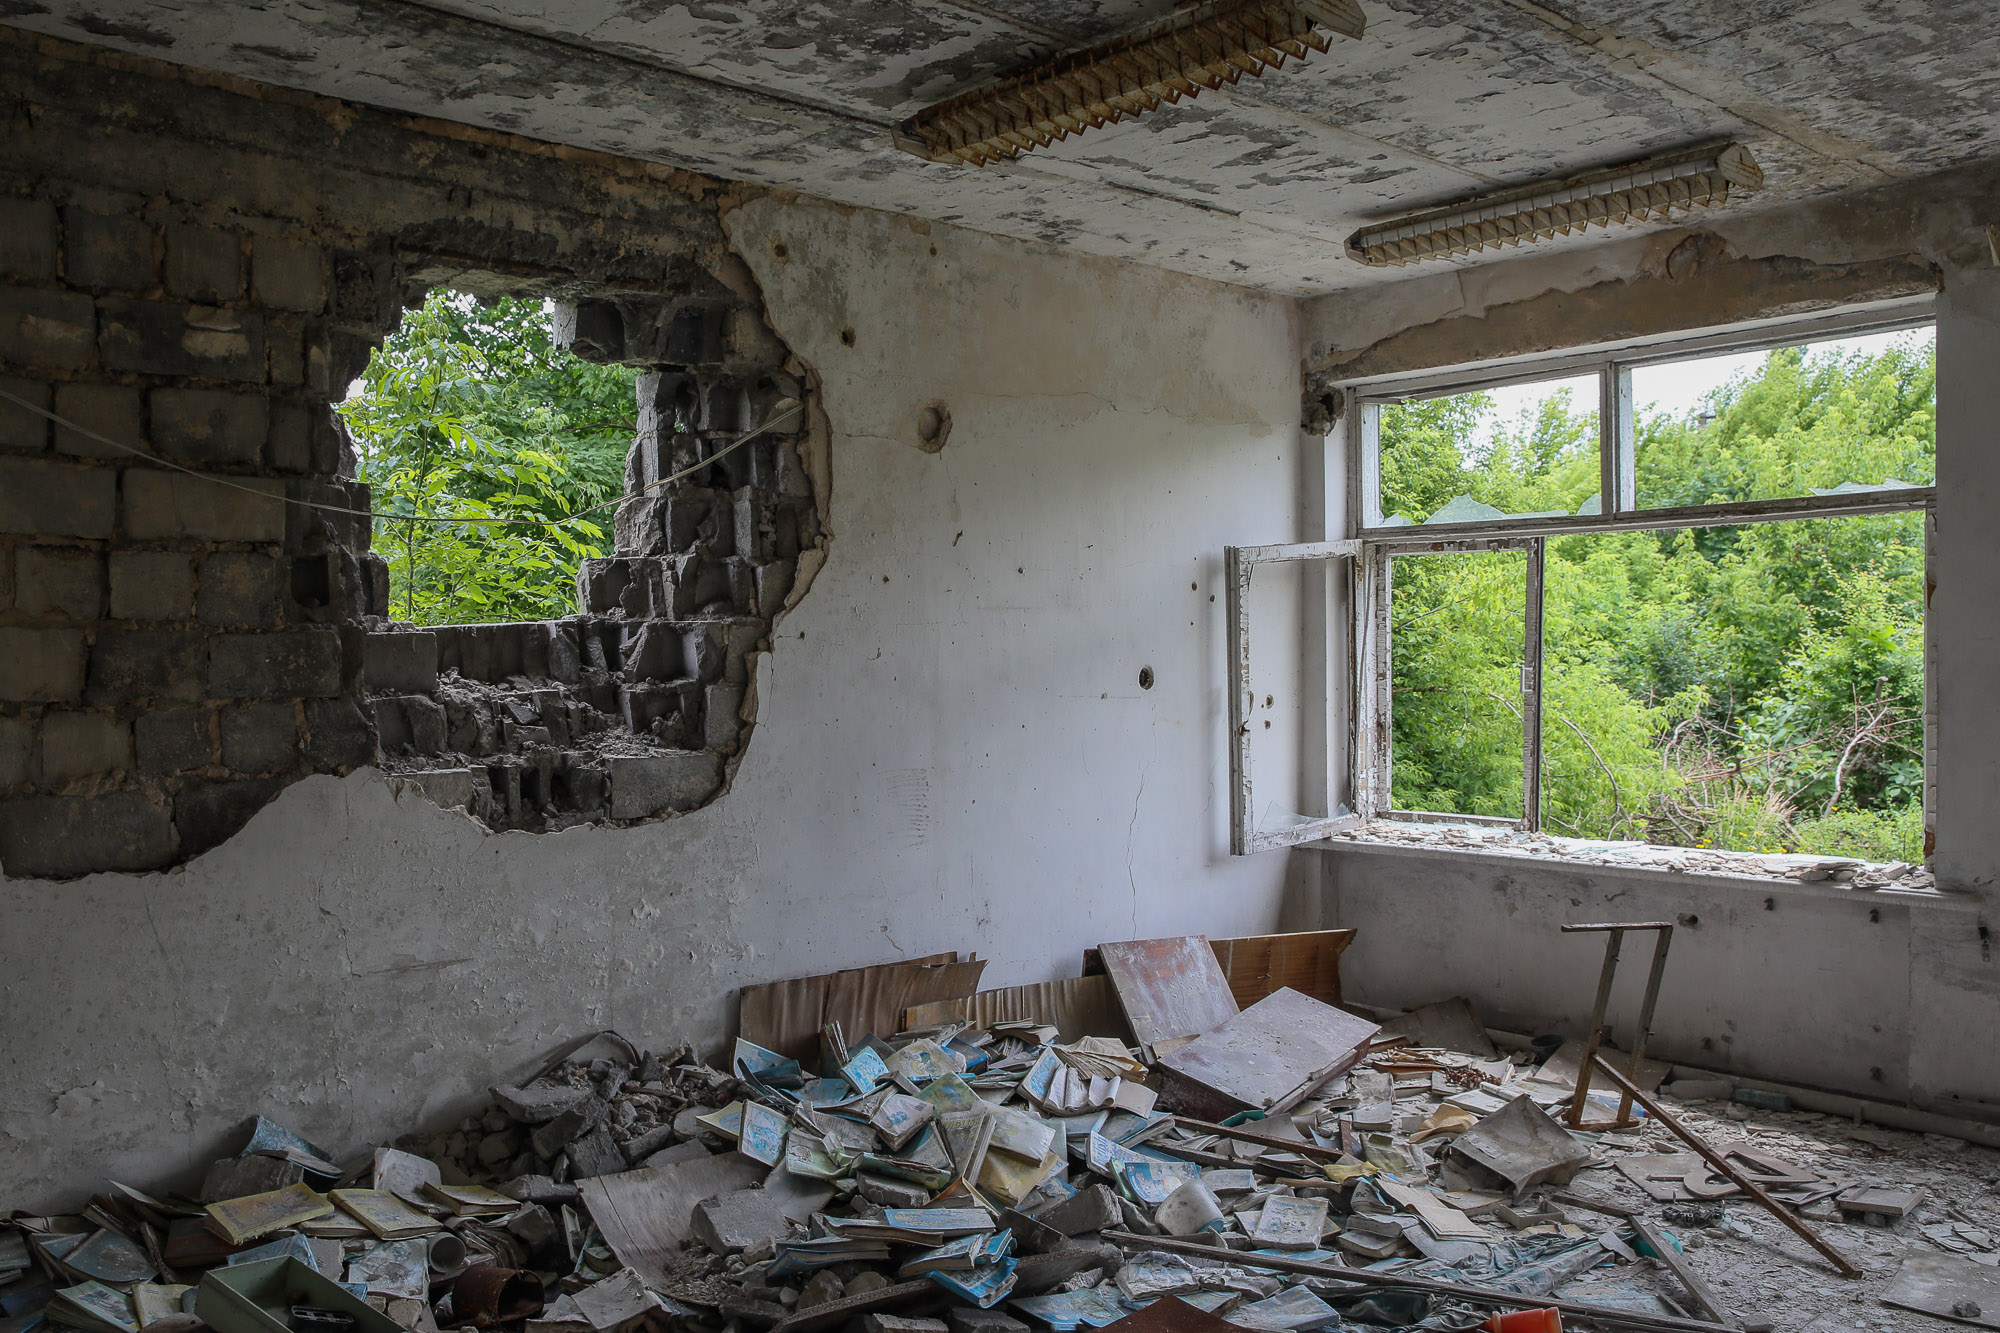 A devastated school library building in the town of Opytne, eastern Ukraine, pictured on June 12, 2019.